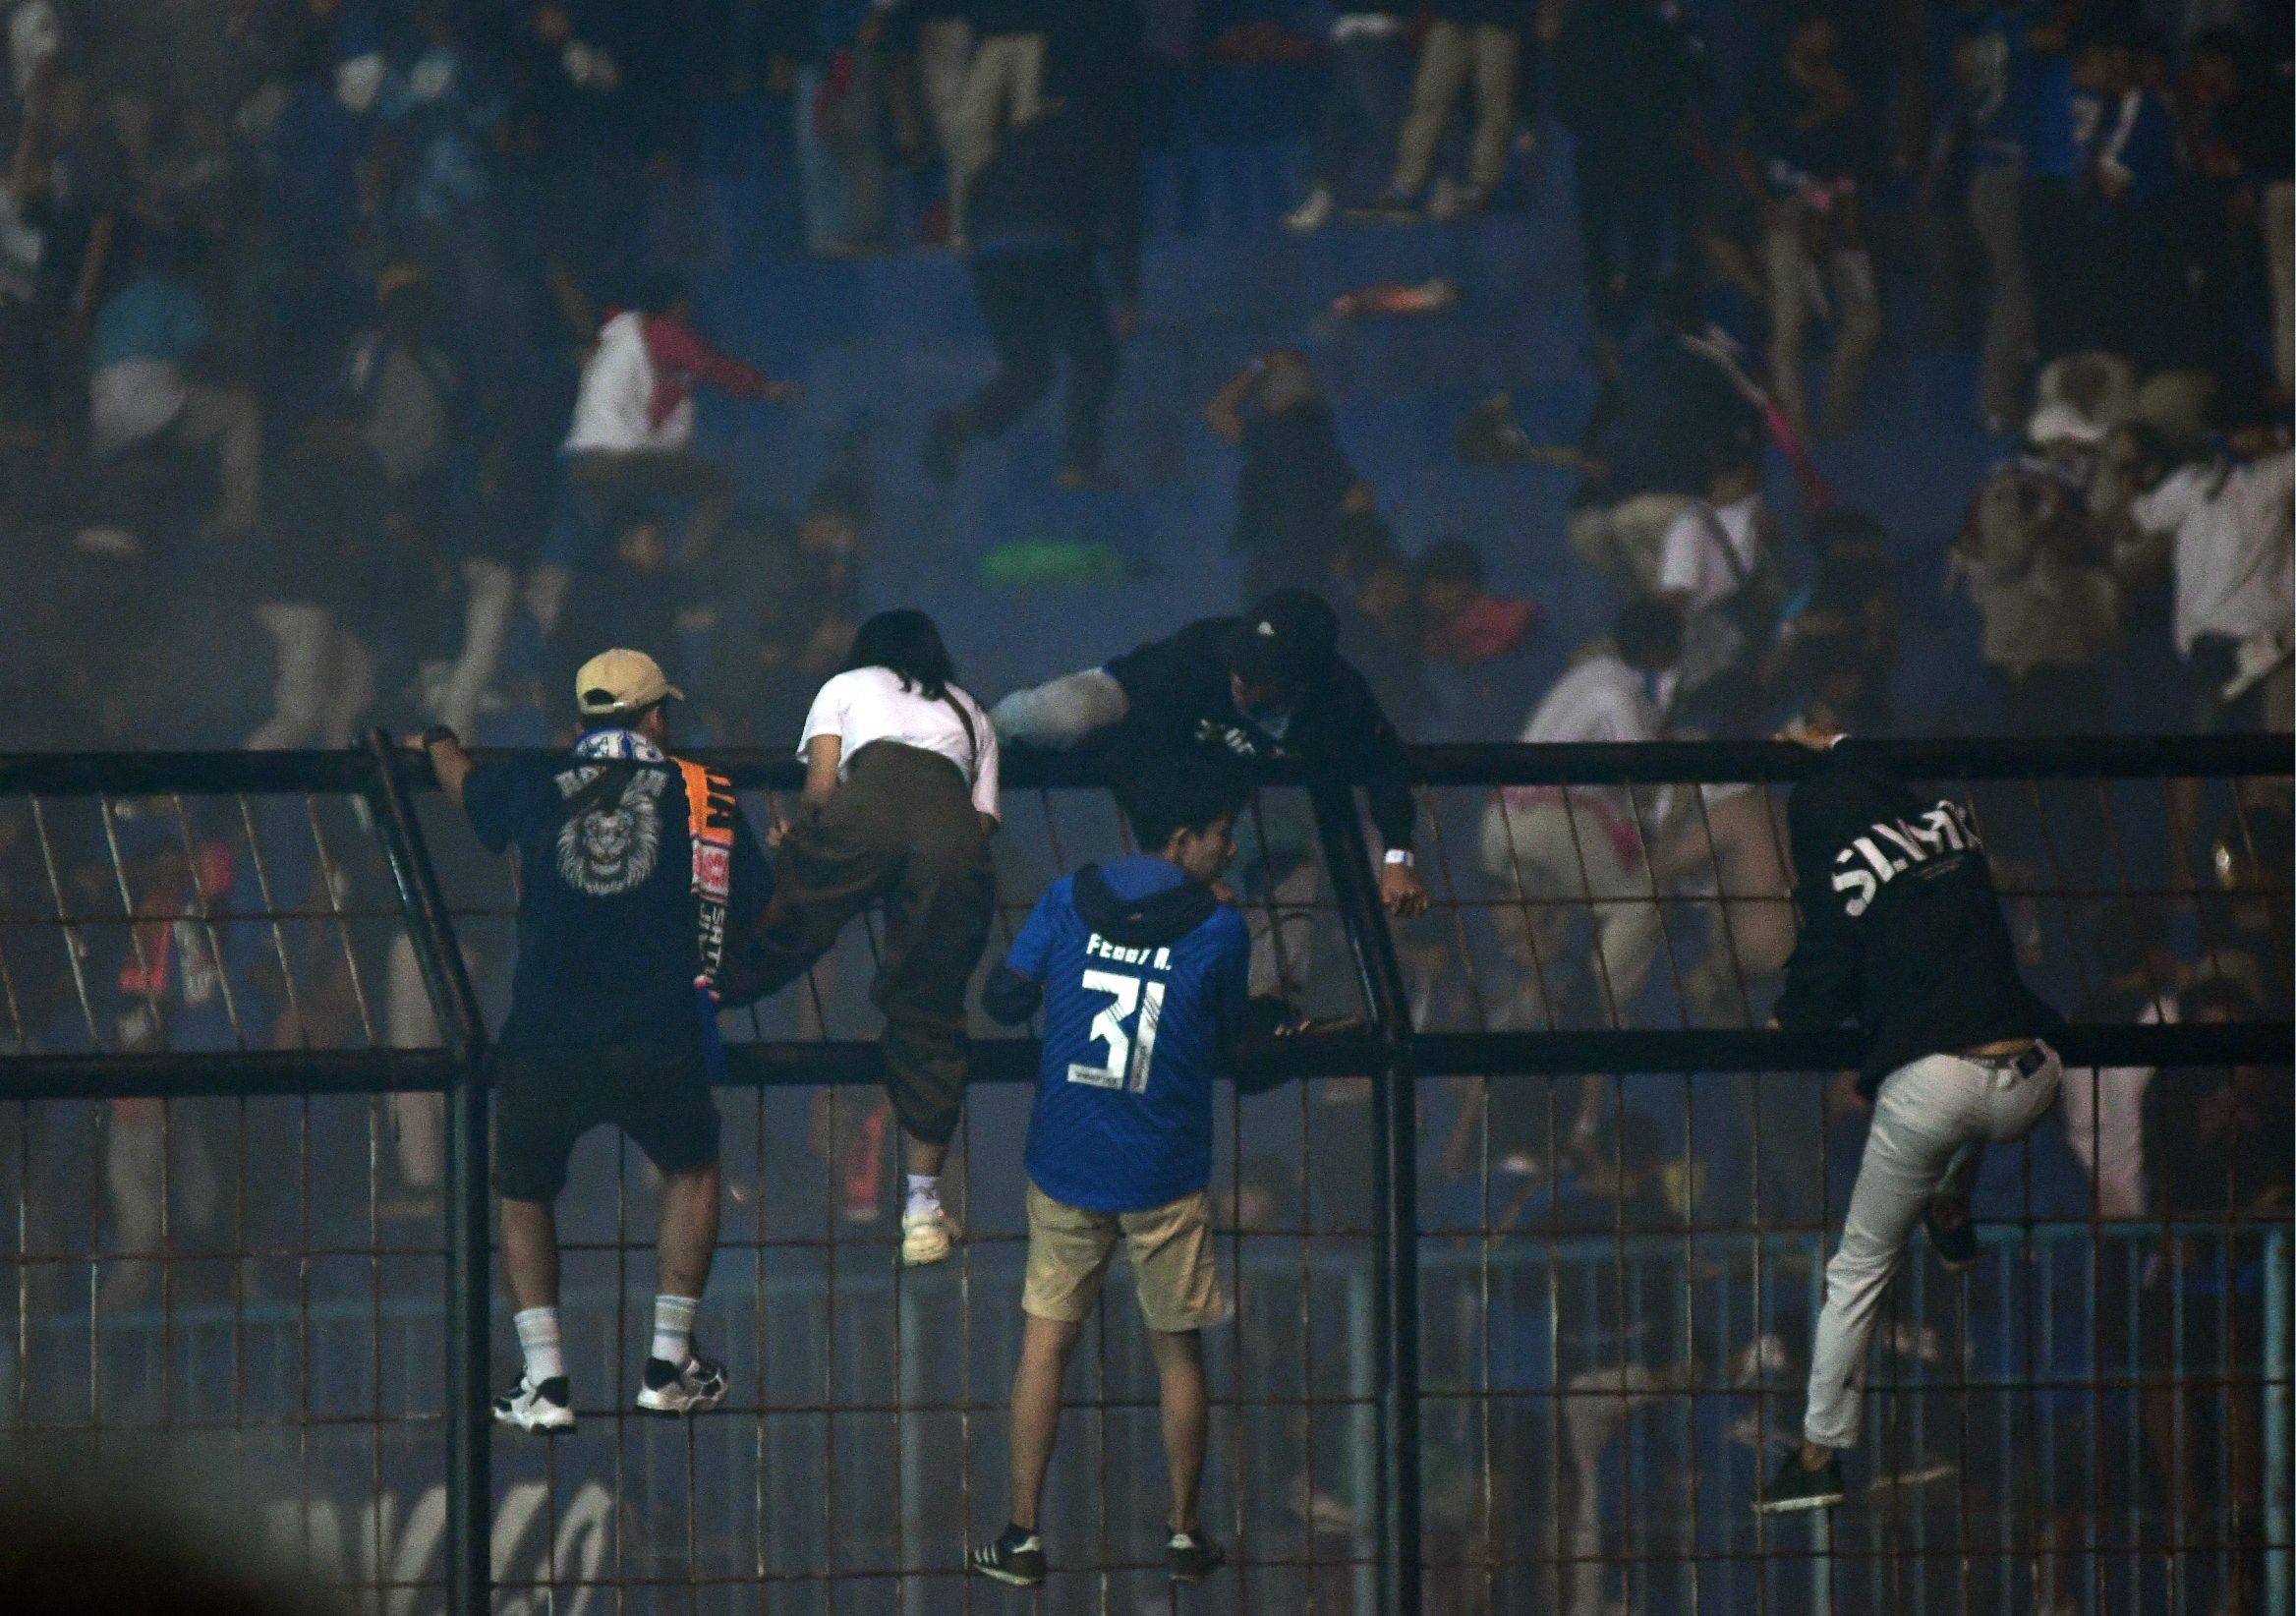 Spectators climb a fence by the stands amid a deadly stampede after a football match in Indonesia. Photo: AFP/File